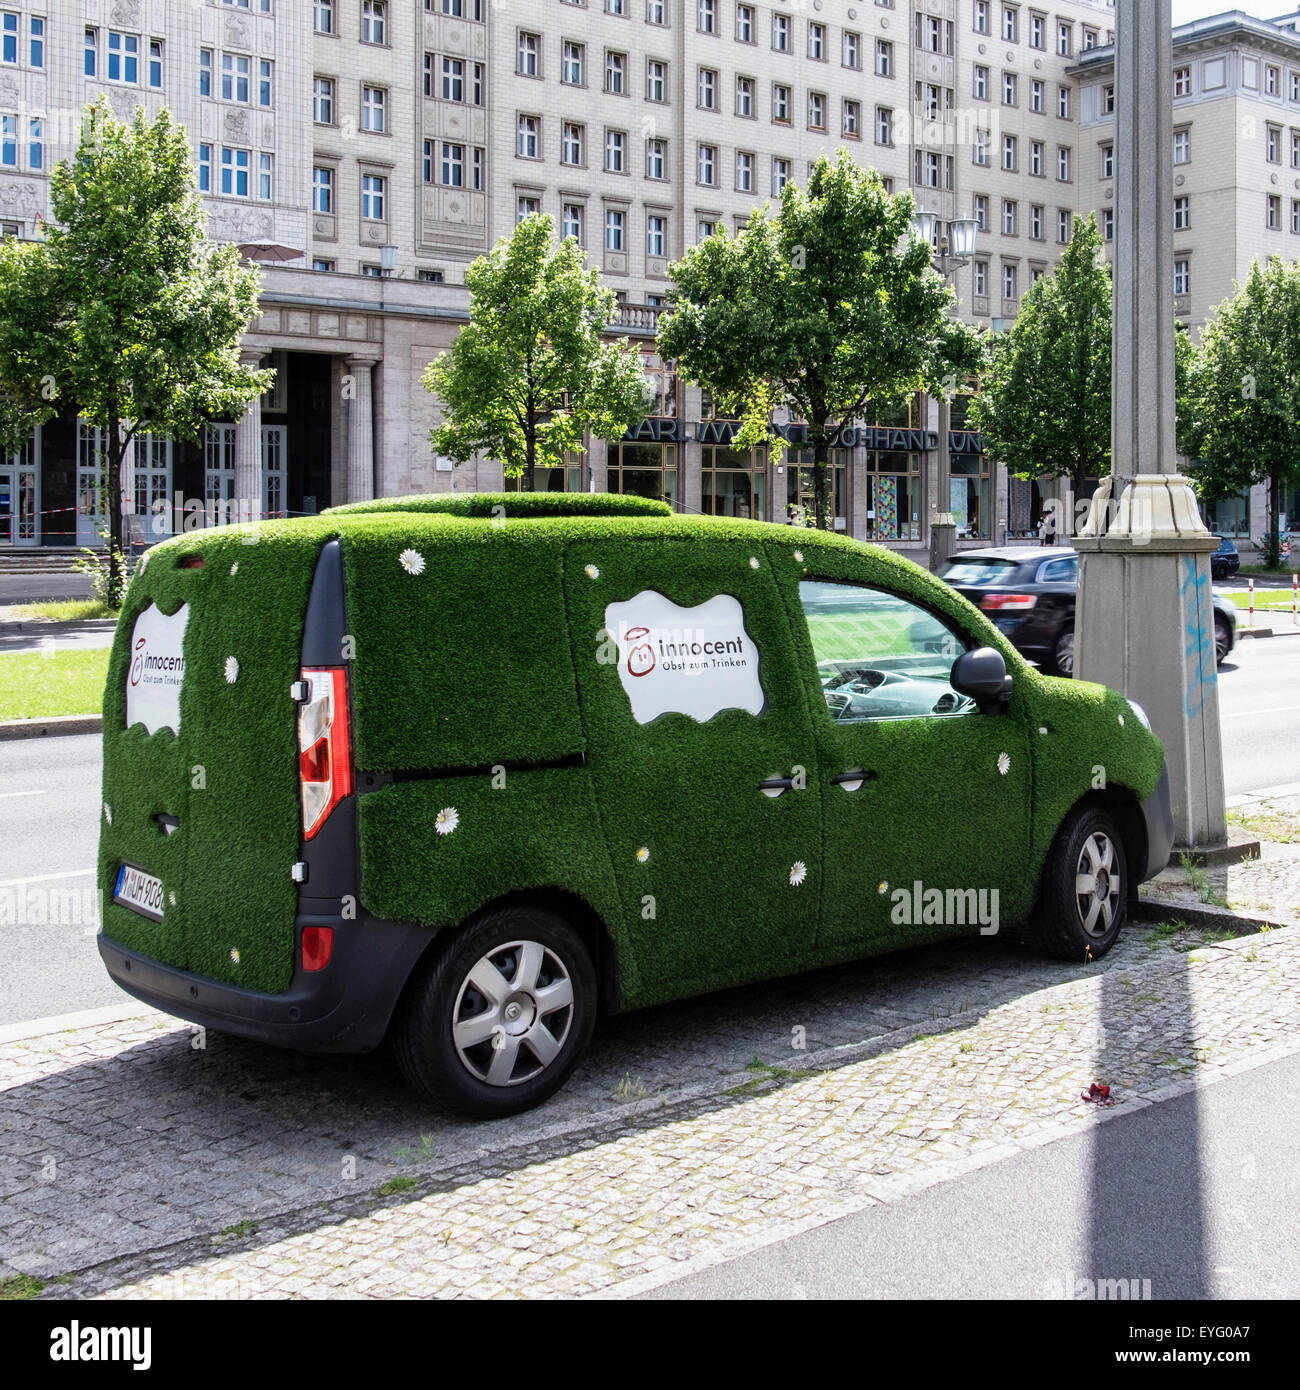 Green Delivery Van parked, vehicle covered in grass and daisies delivers  Innocent juices Stock Photo - Alamy